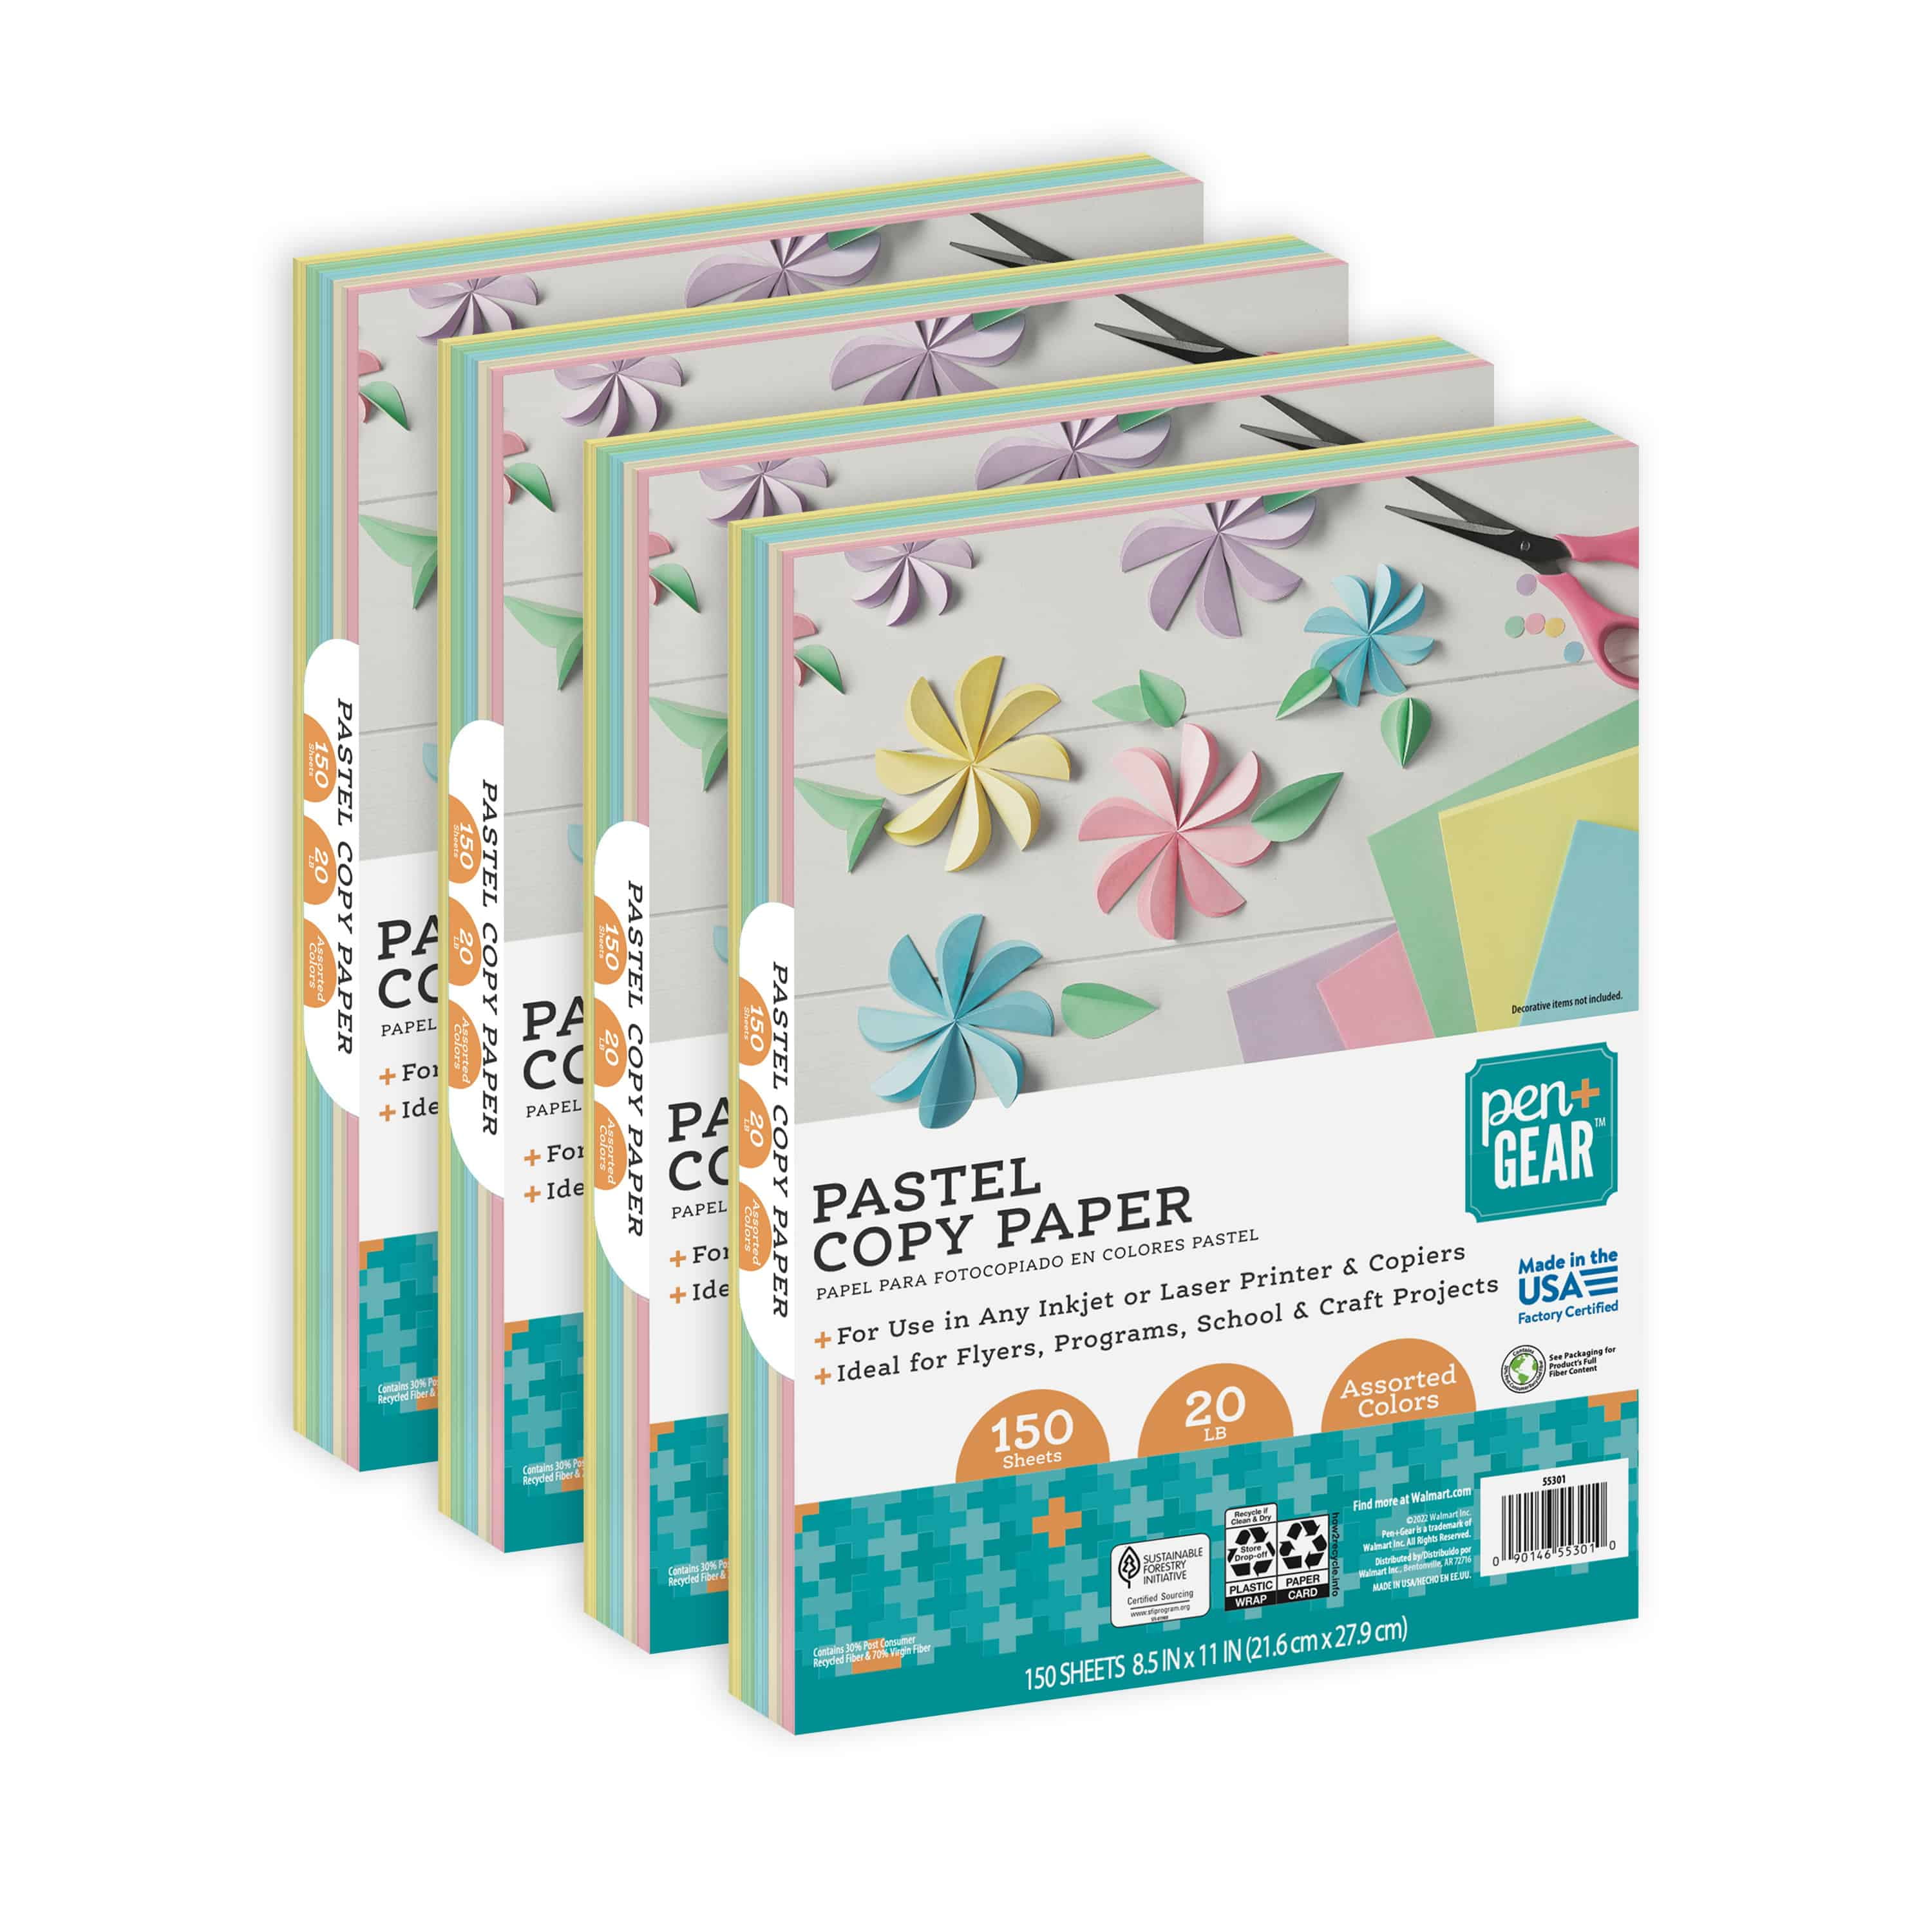 Printworks Pastel Paper, 20 lb, 4 Assorted Pastel Colors, 30% Recycled Color Printer Paper, 6 Pack Bundle, 600 Sheets, 8.5 x 11 inch (00577)